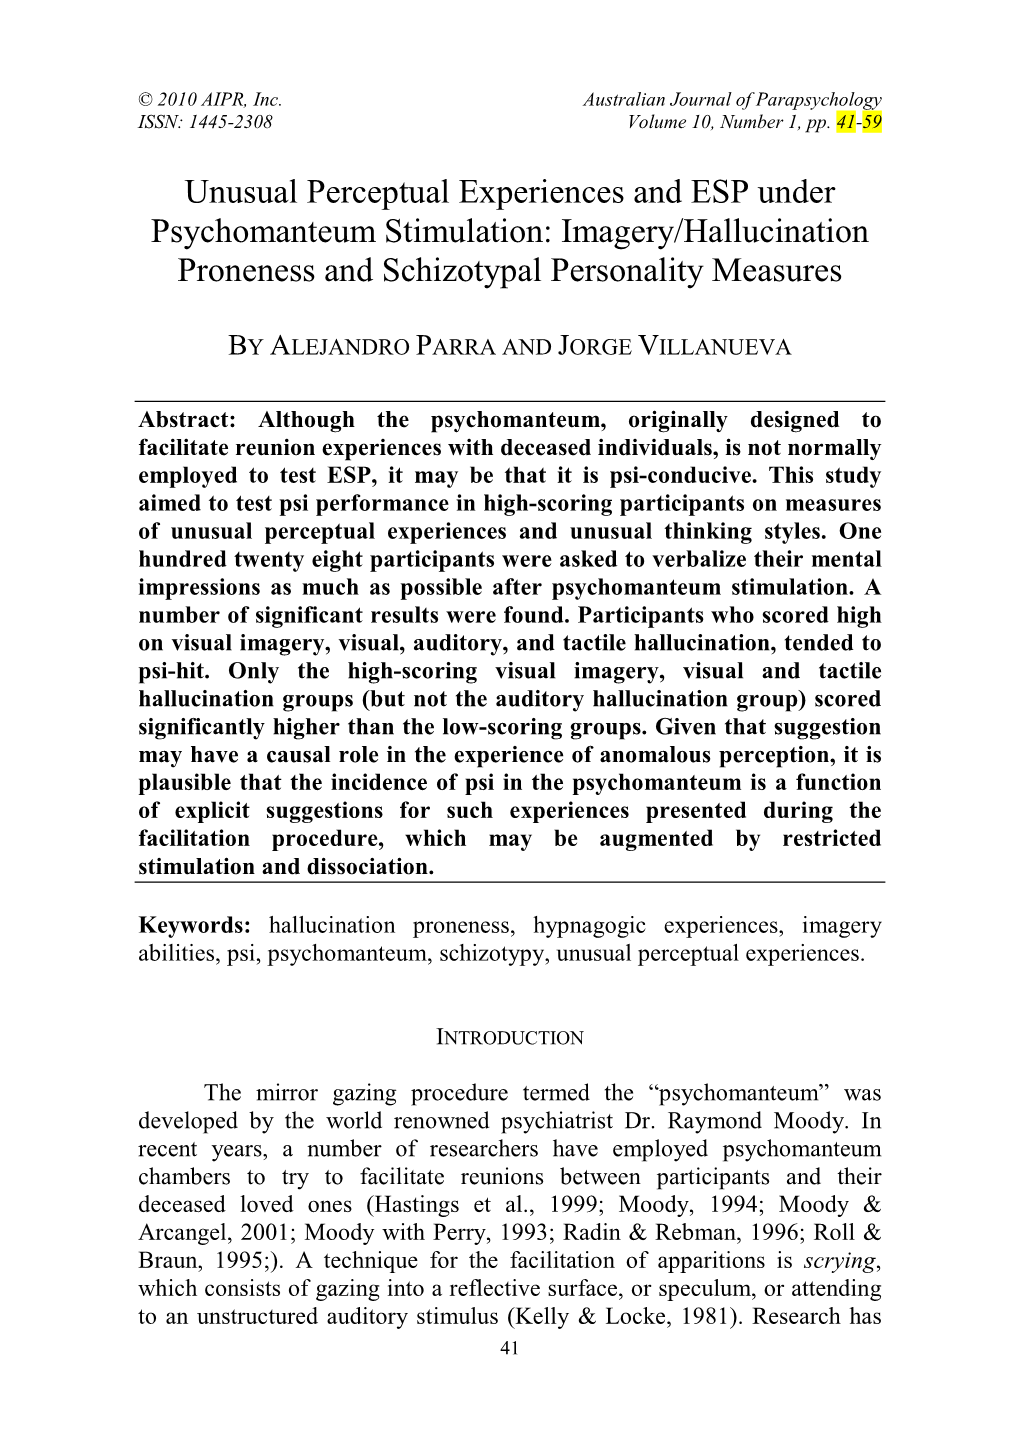 Unusual Perceptual Experiences and ESP Under Psychomanteum Stimulation: Imagery/Hallucination Proneness and Schizotypal Personality Measures